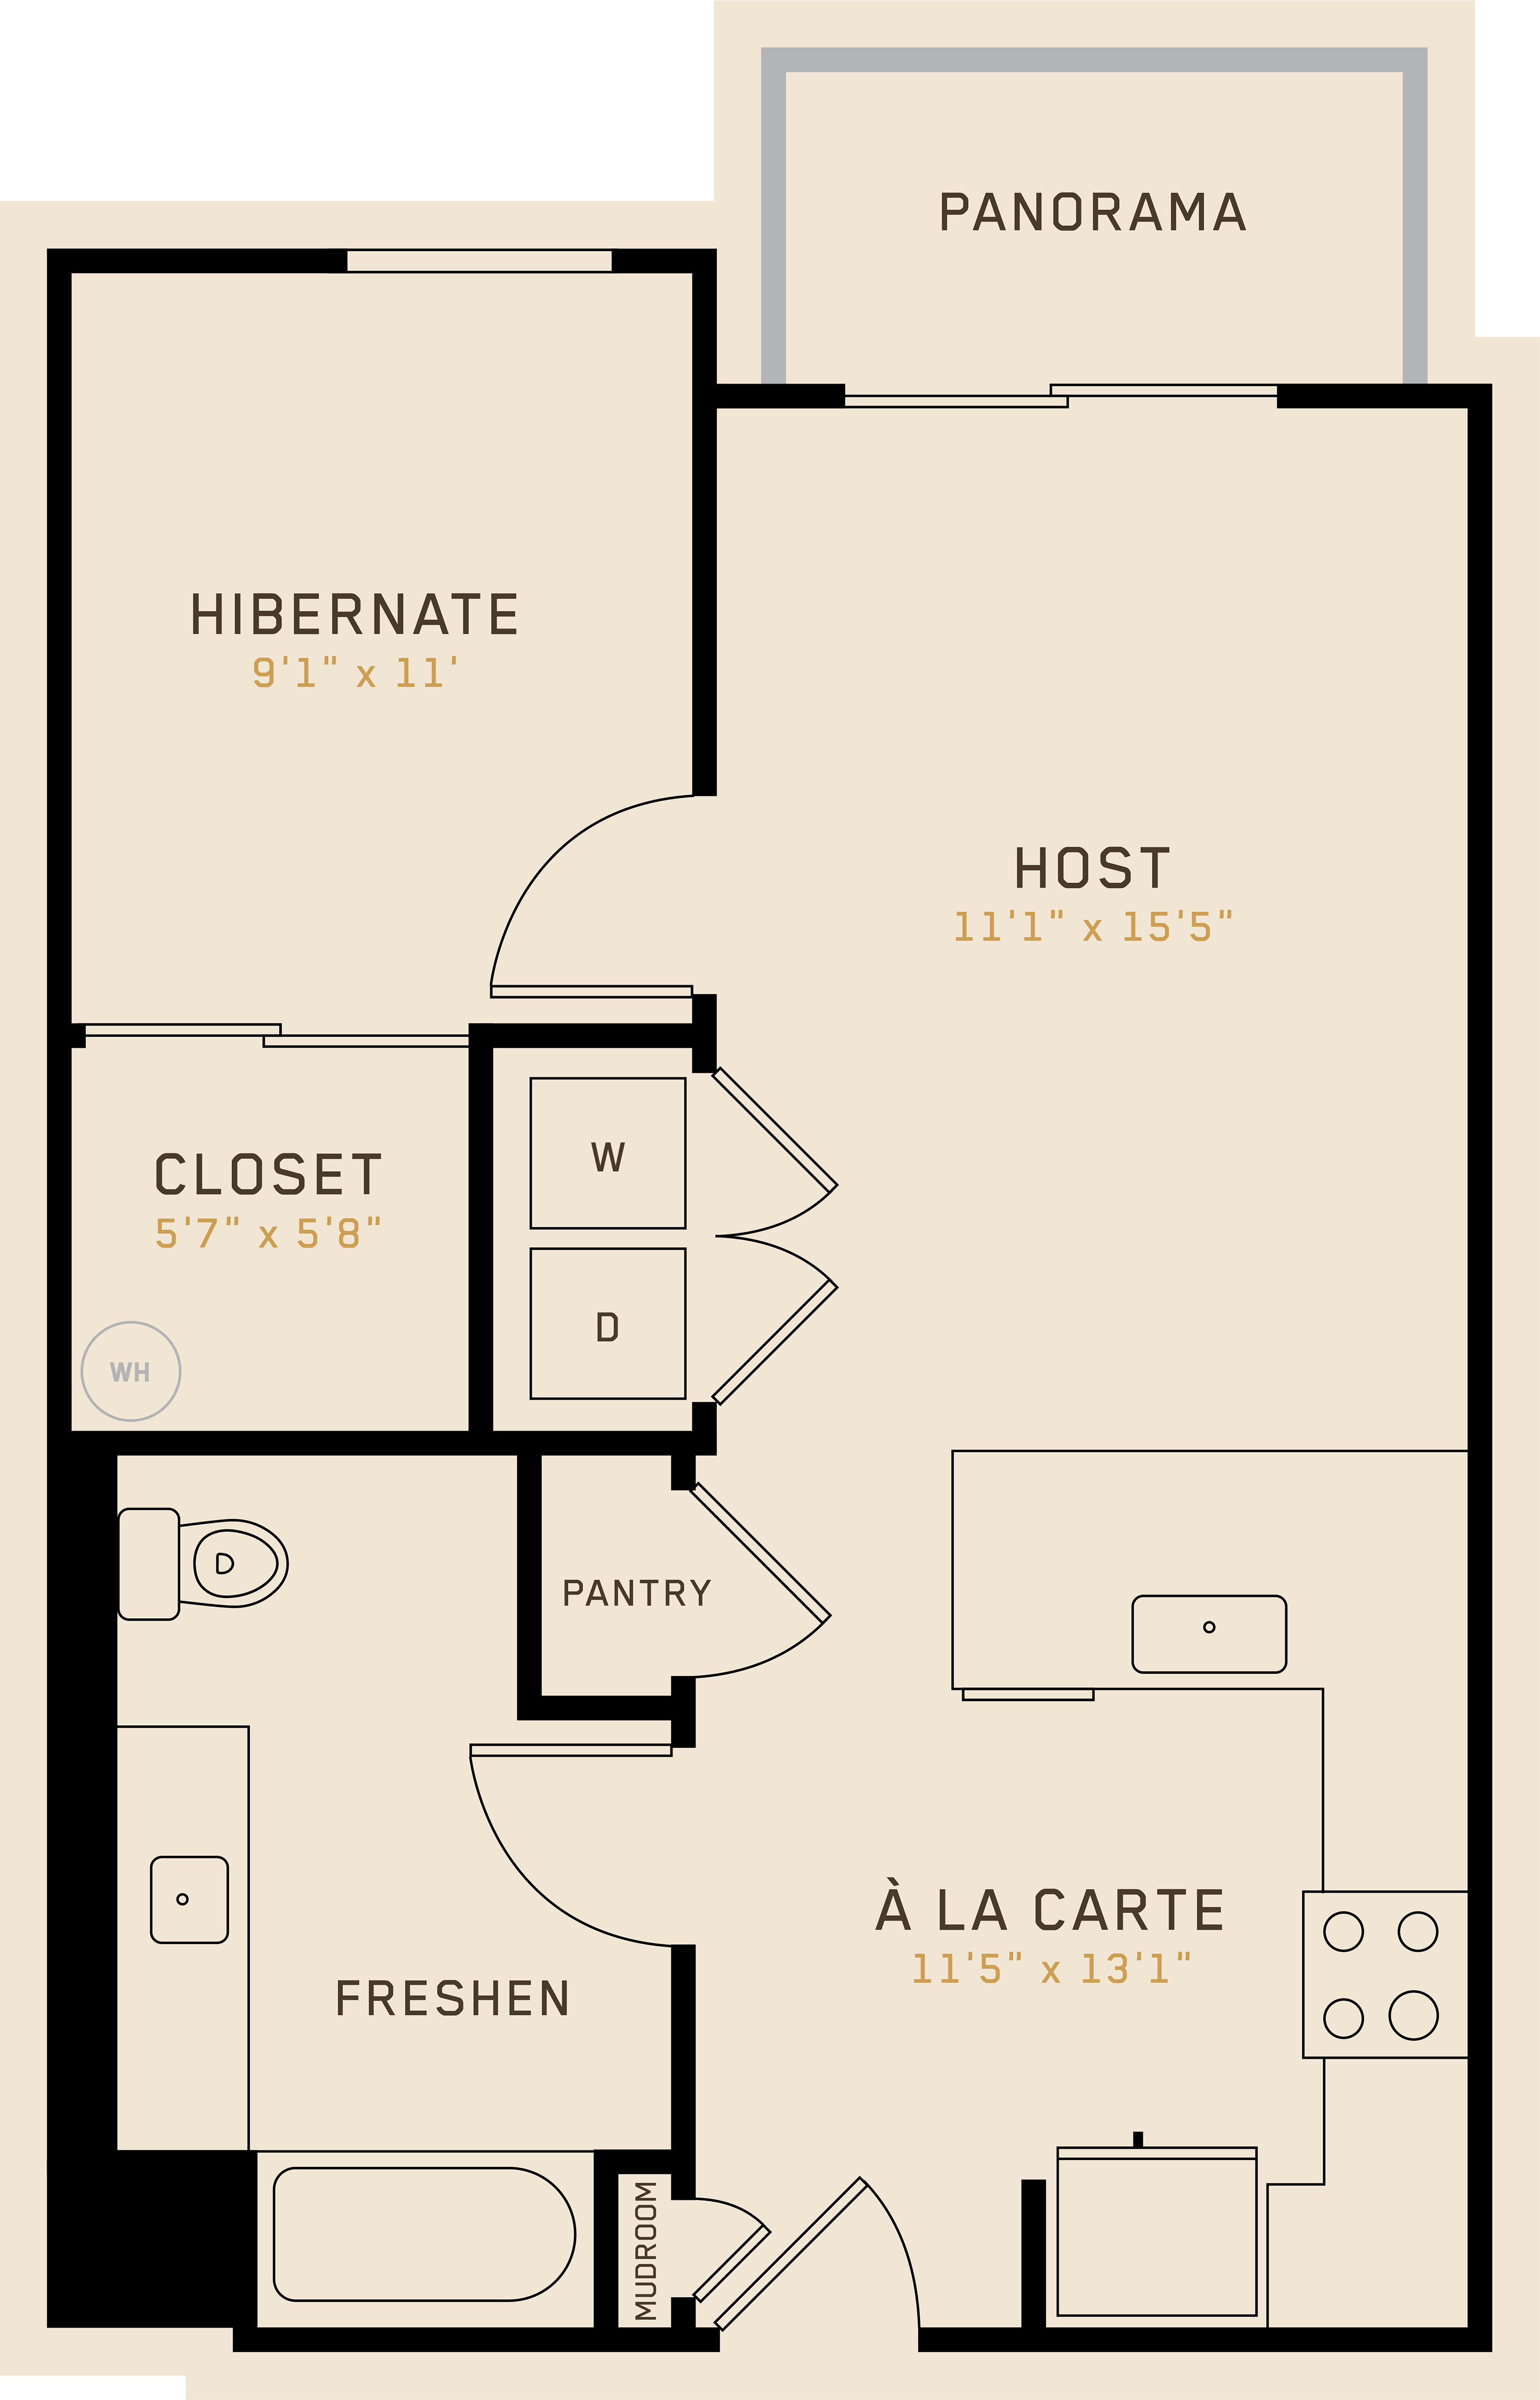 A1I floor plan featuring 1 bedroom, 1 bathroom, and is 652 square feet